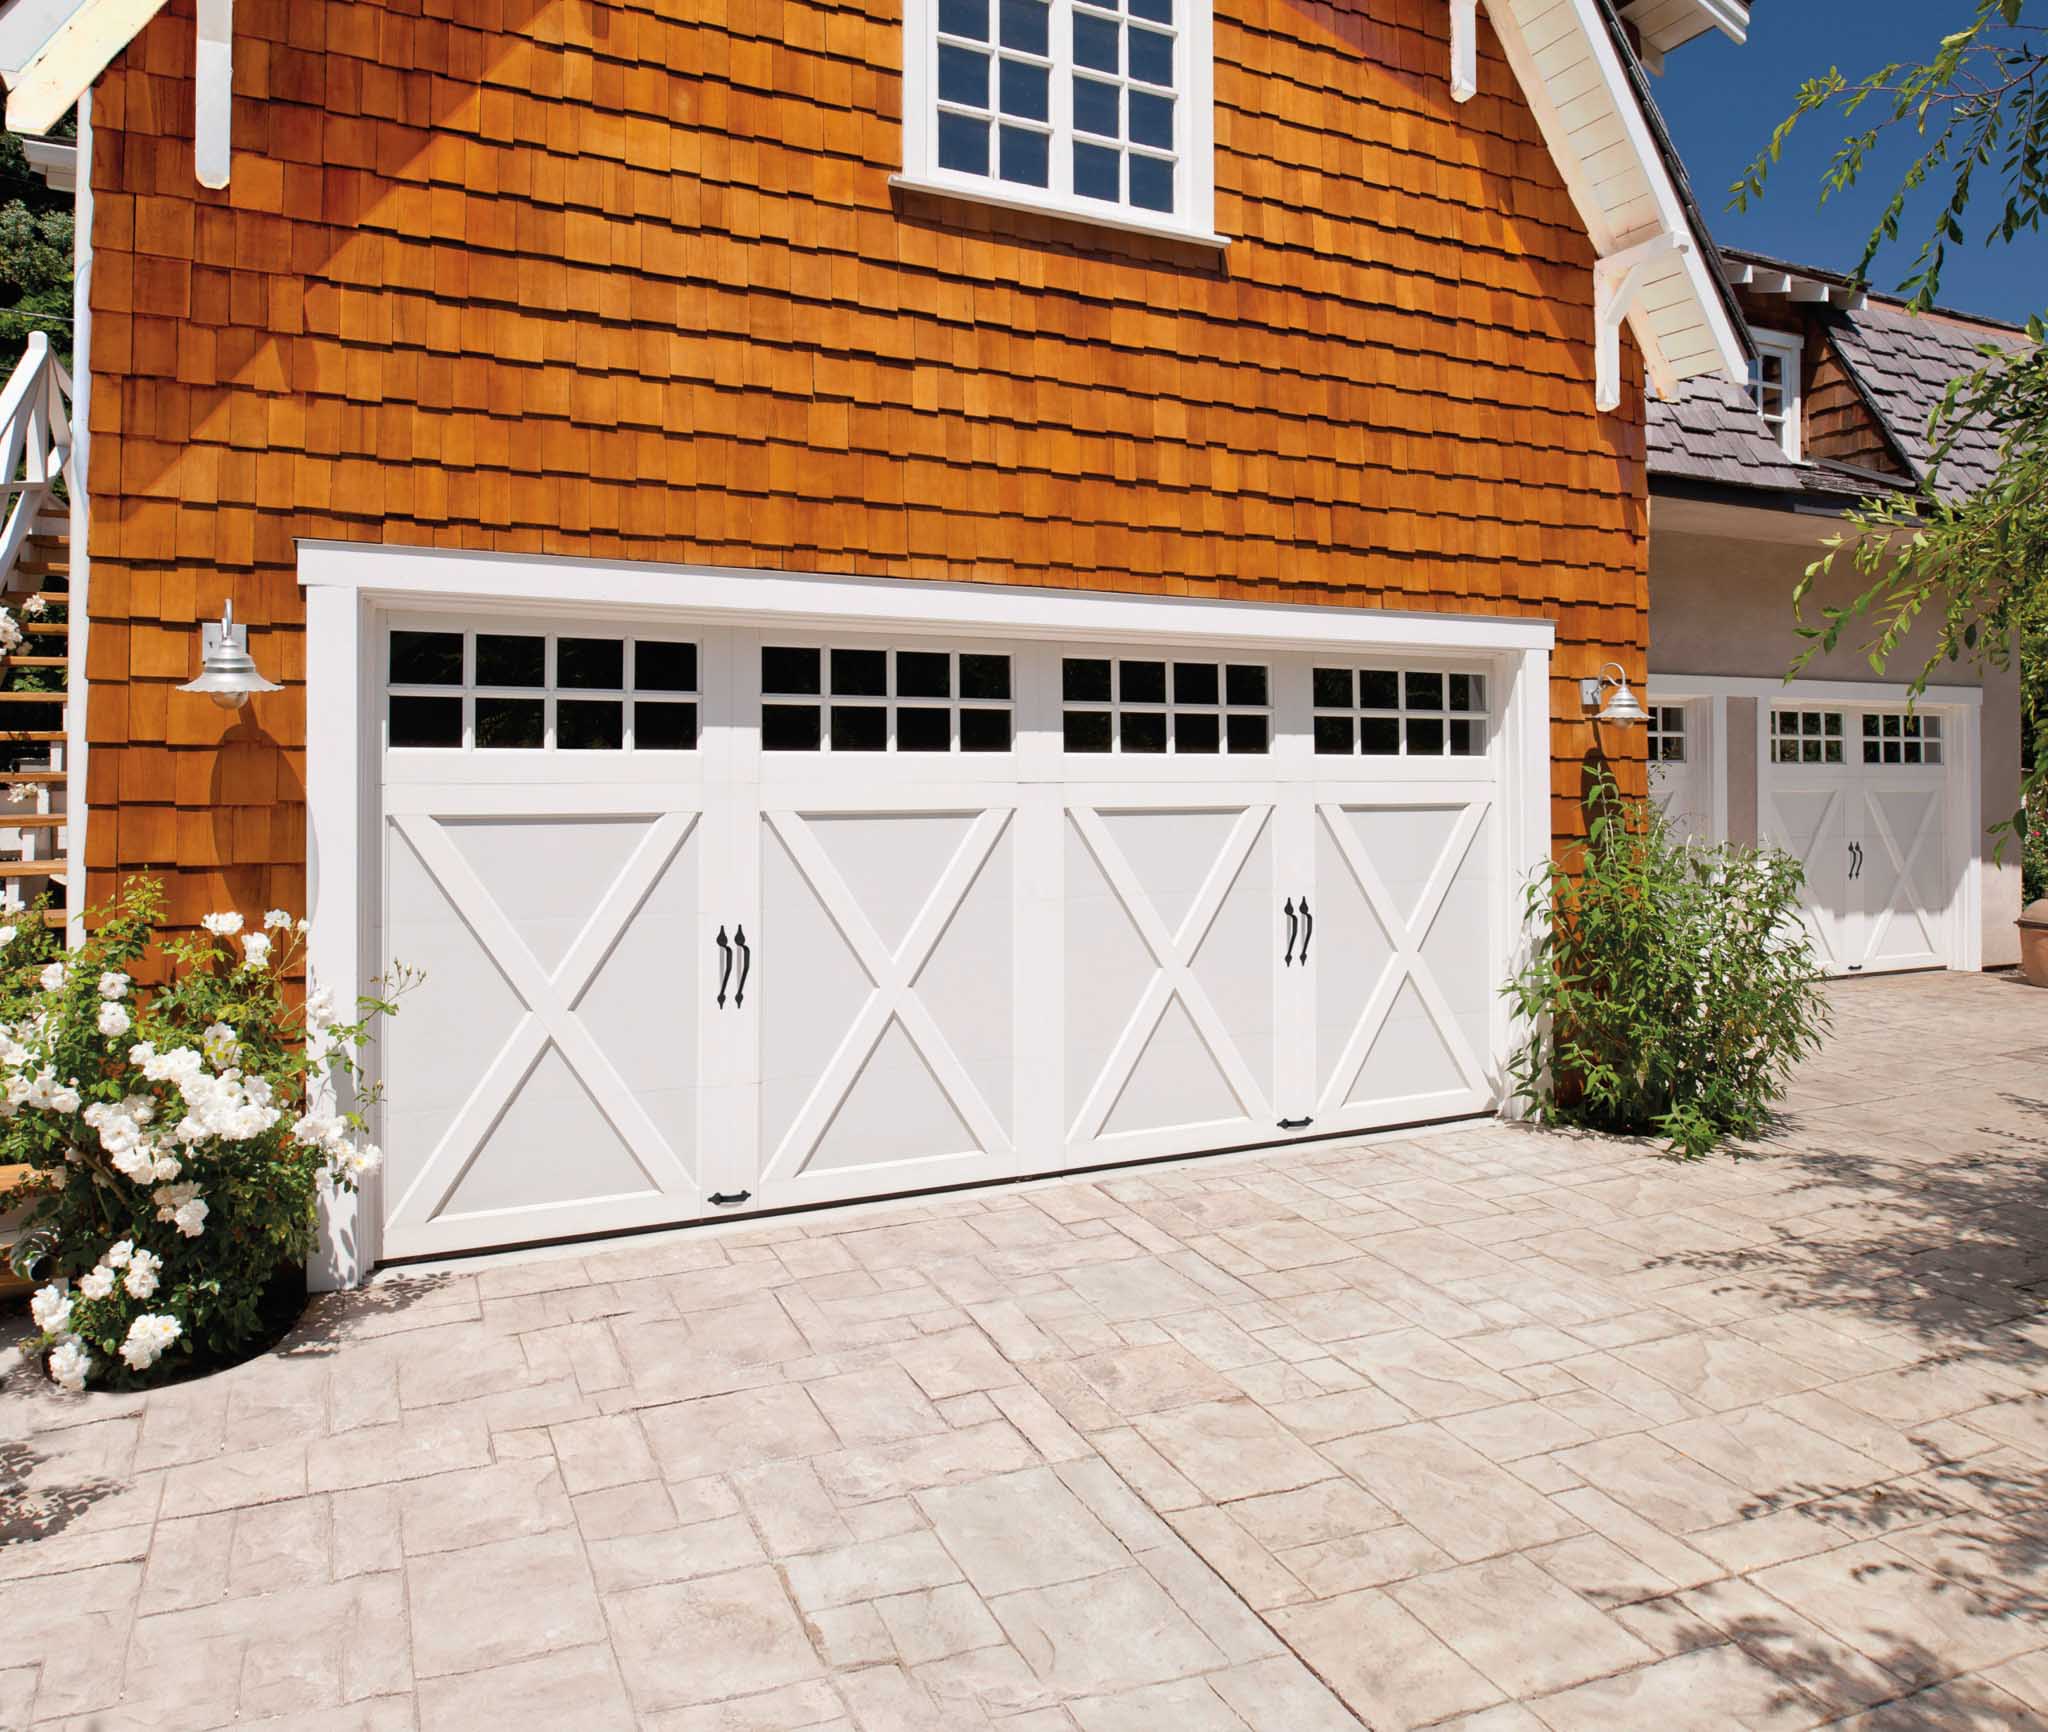 16 x 8 composite trim garage door with a smooth finish